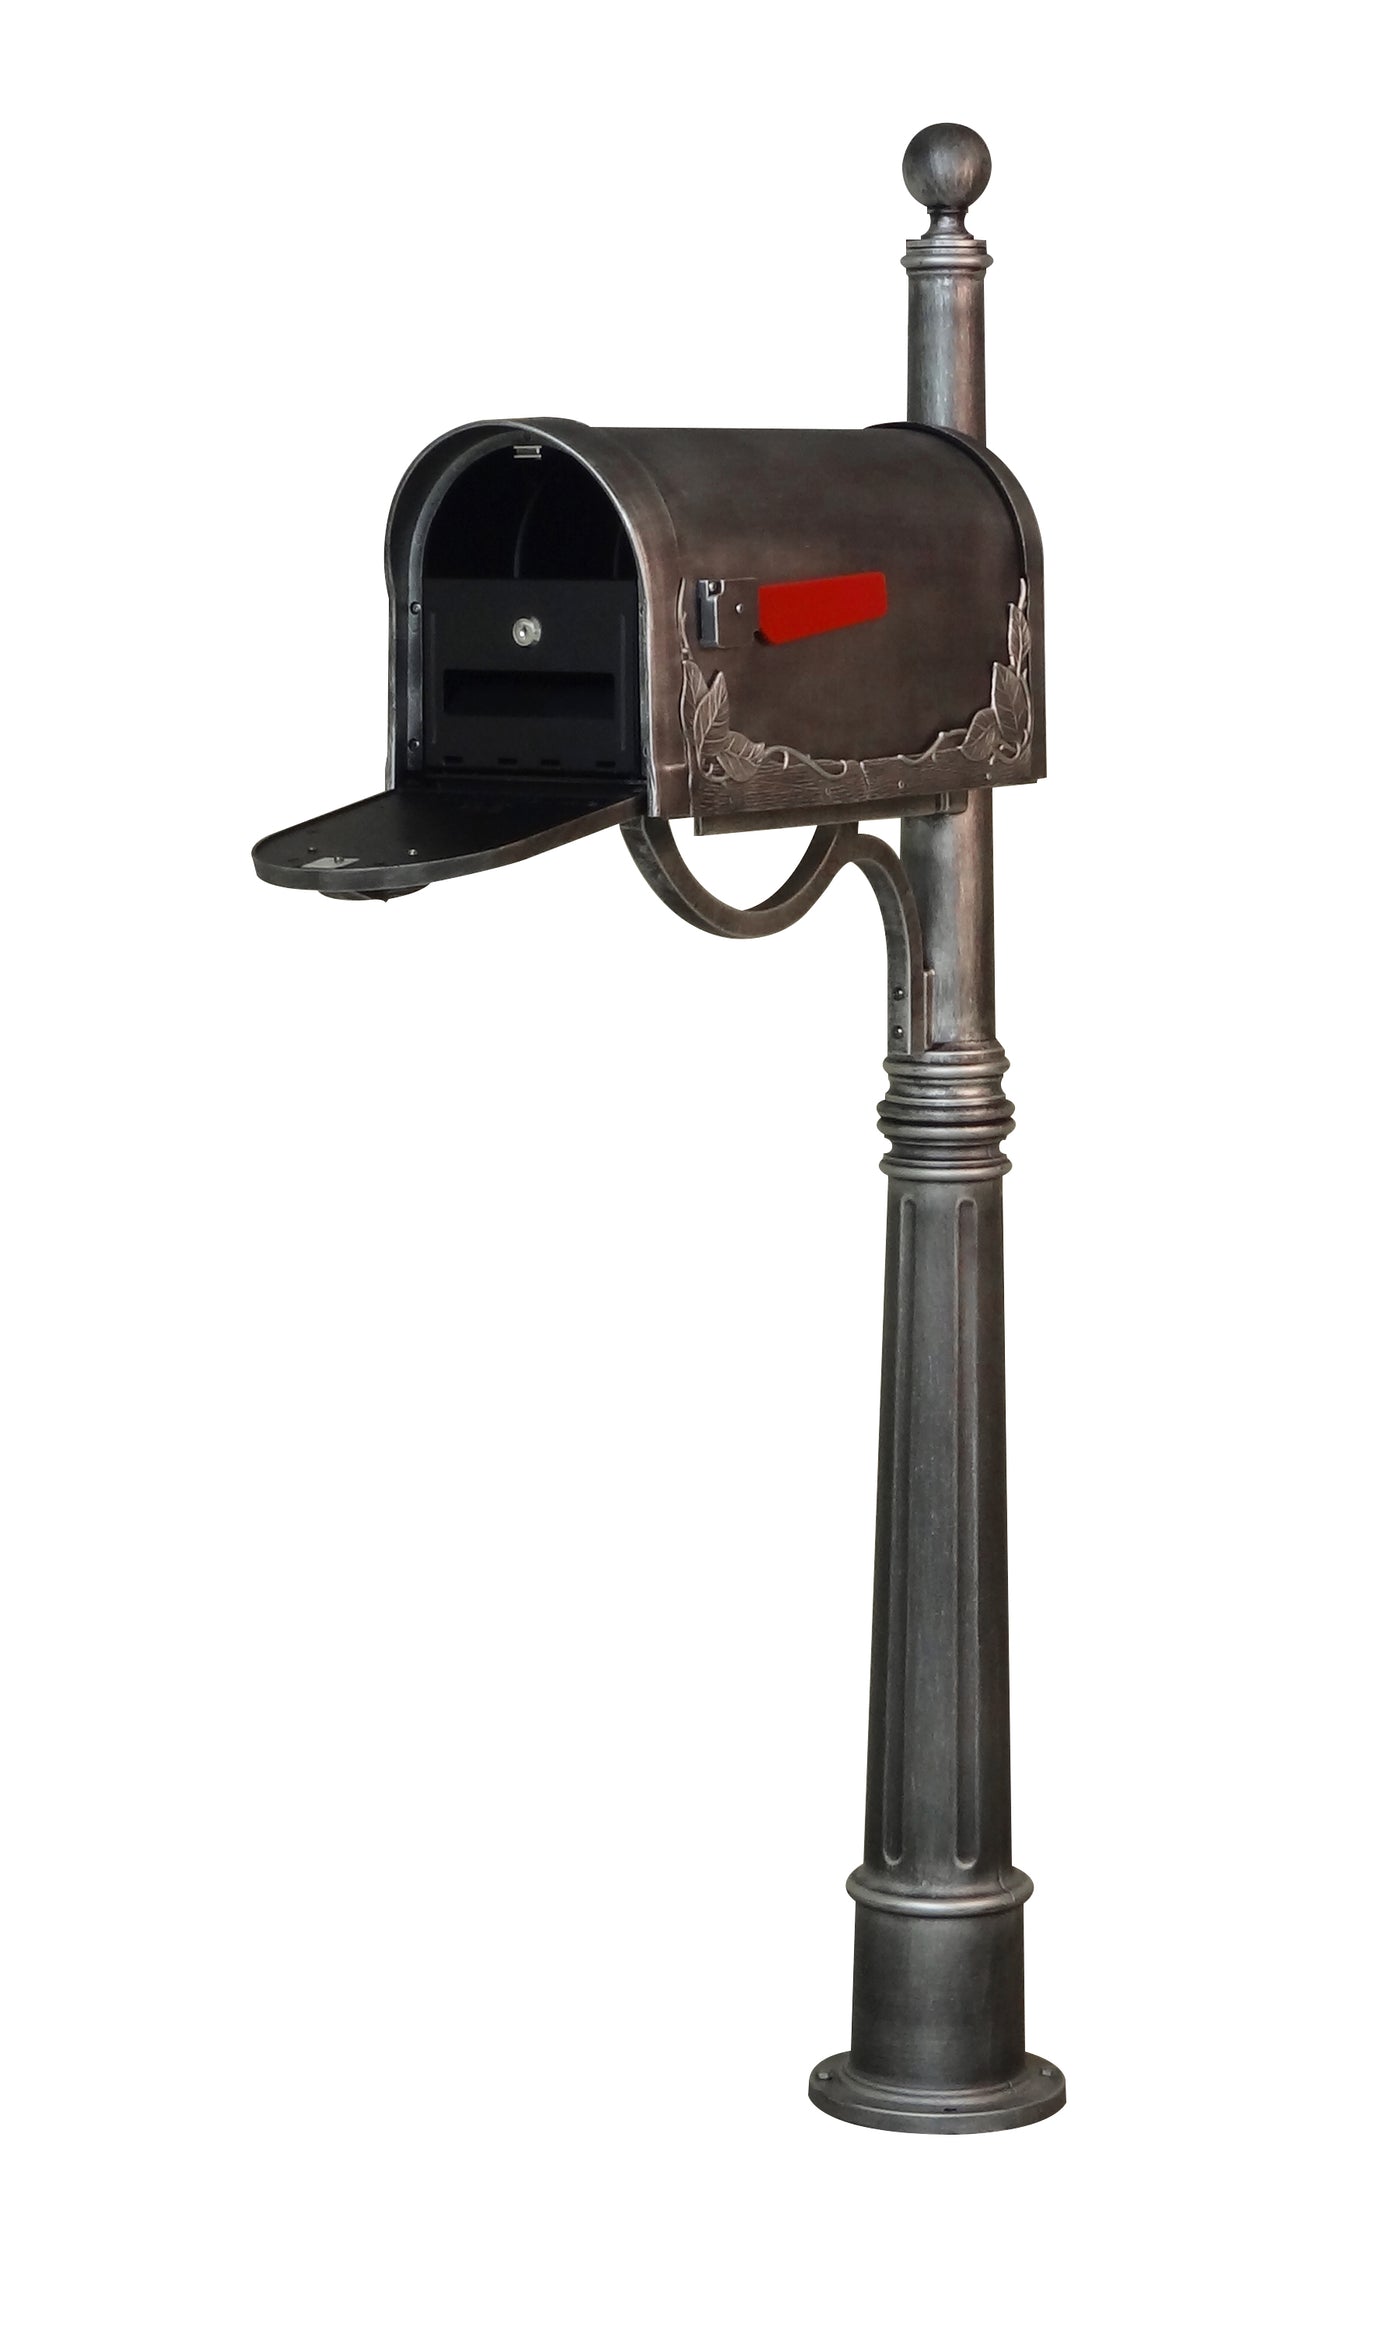 Floral Curbside Mailbox with Locking Insert and Ashland Mailbox Post